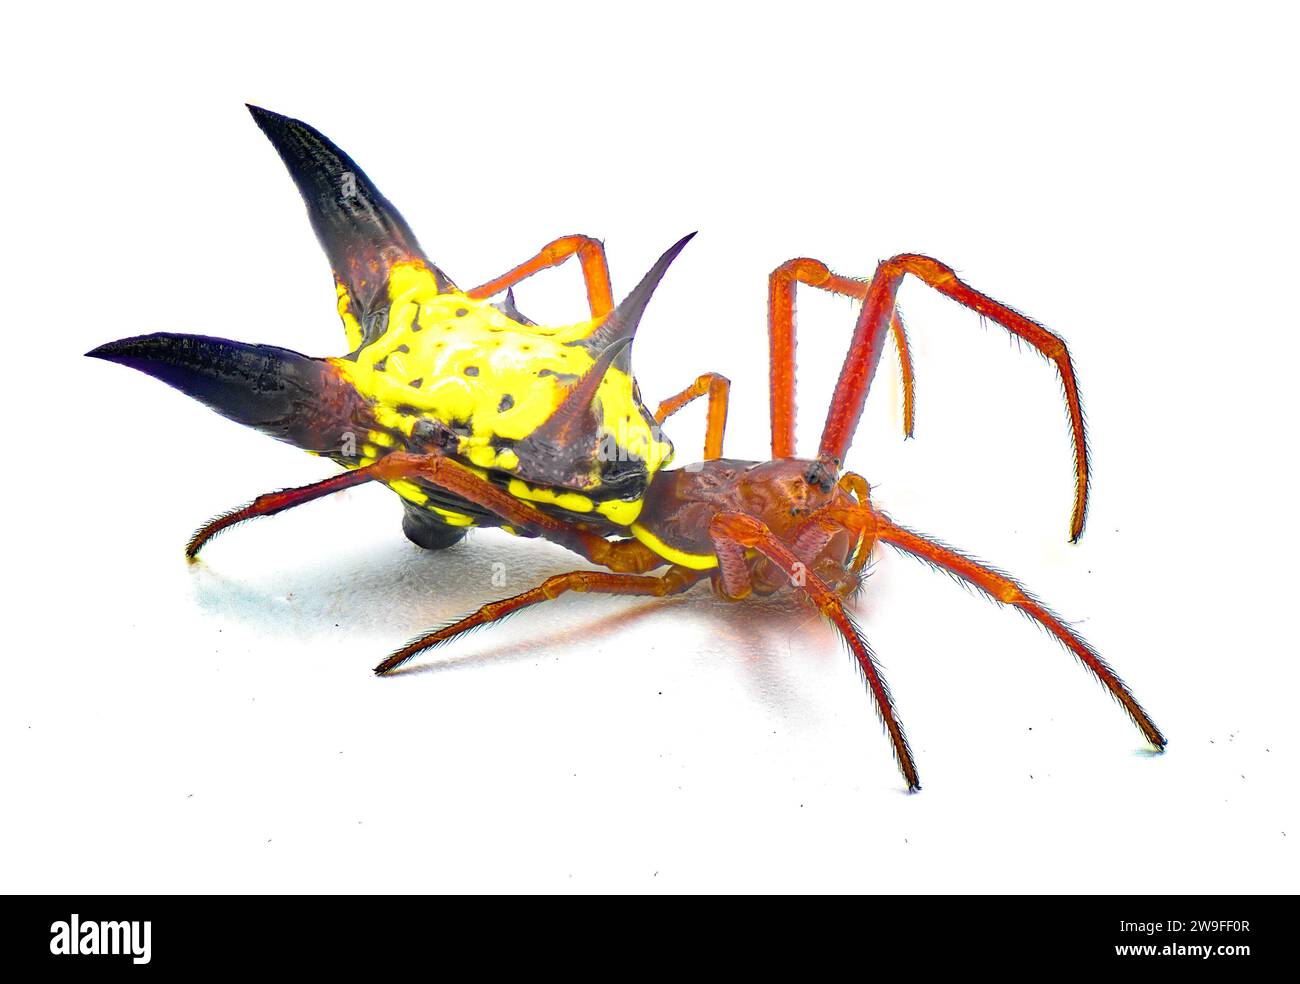 arrow shaped micrathena orbweaver or orb weaver spider - Micrathena sagittata - yellow, red and black patterning and two large sharp triangular tuberc Stock Photo